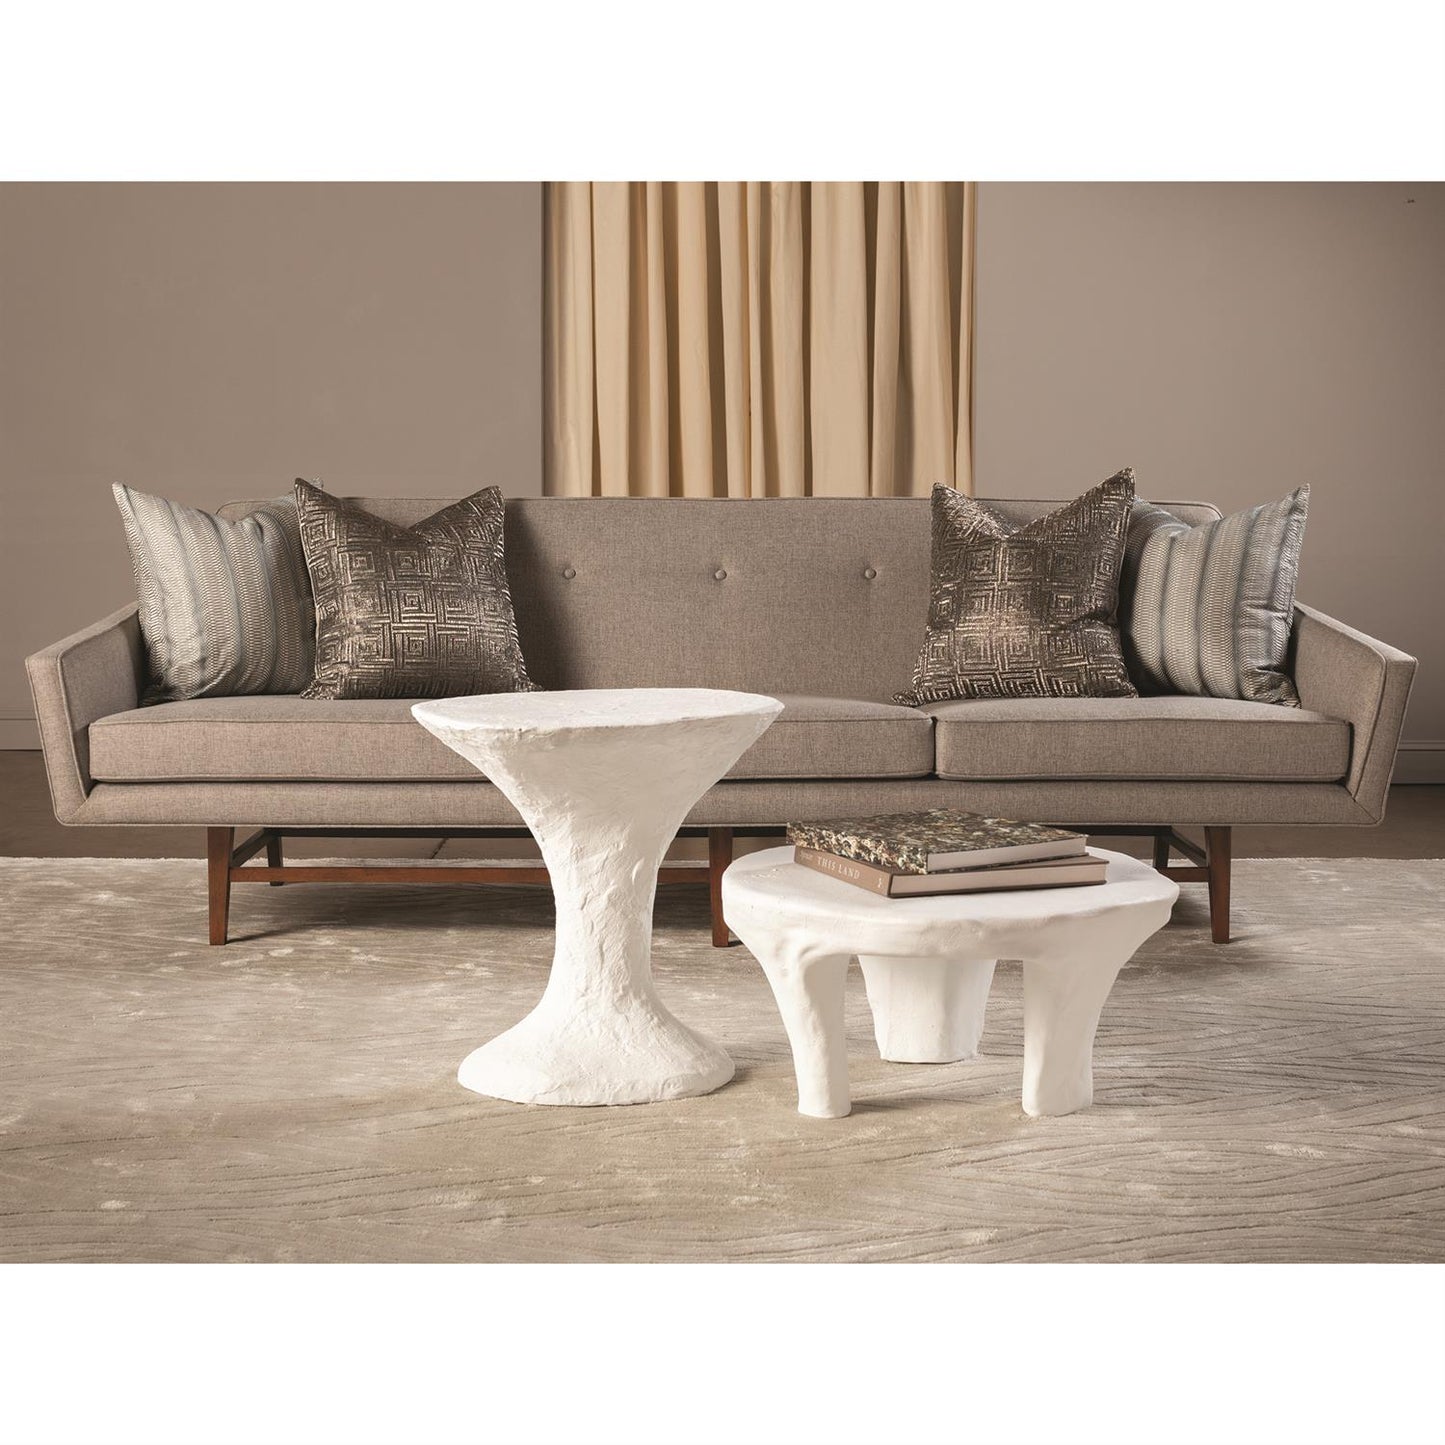 Monolith Coffee Table - Soft White